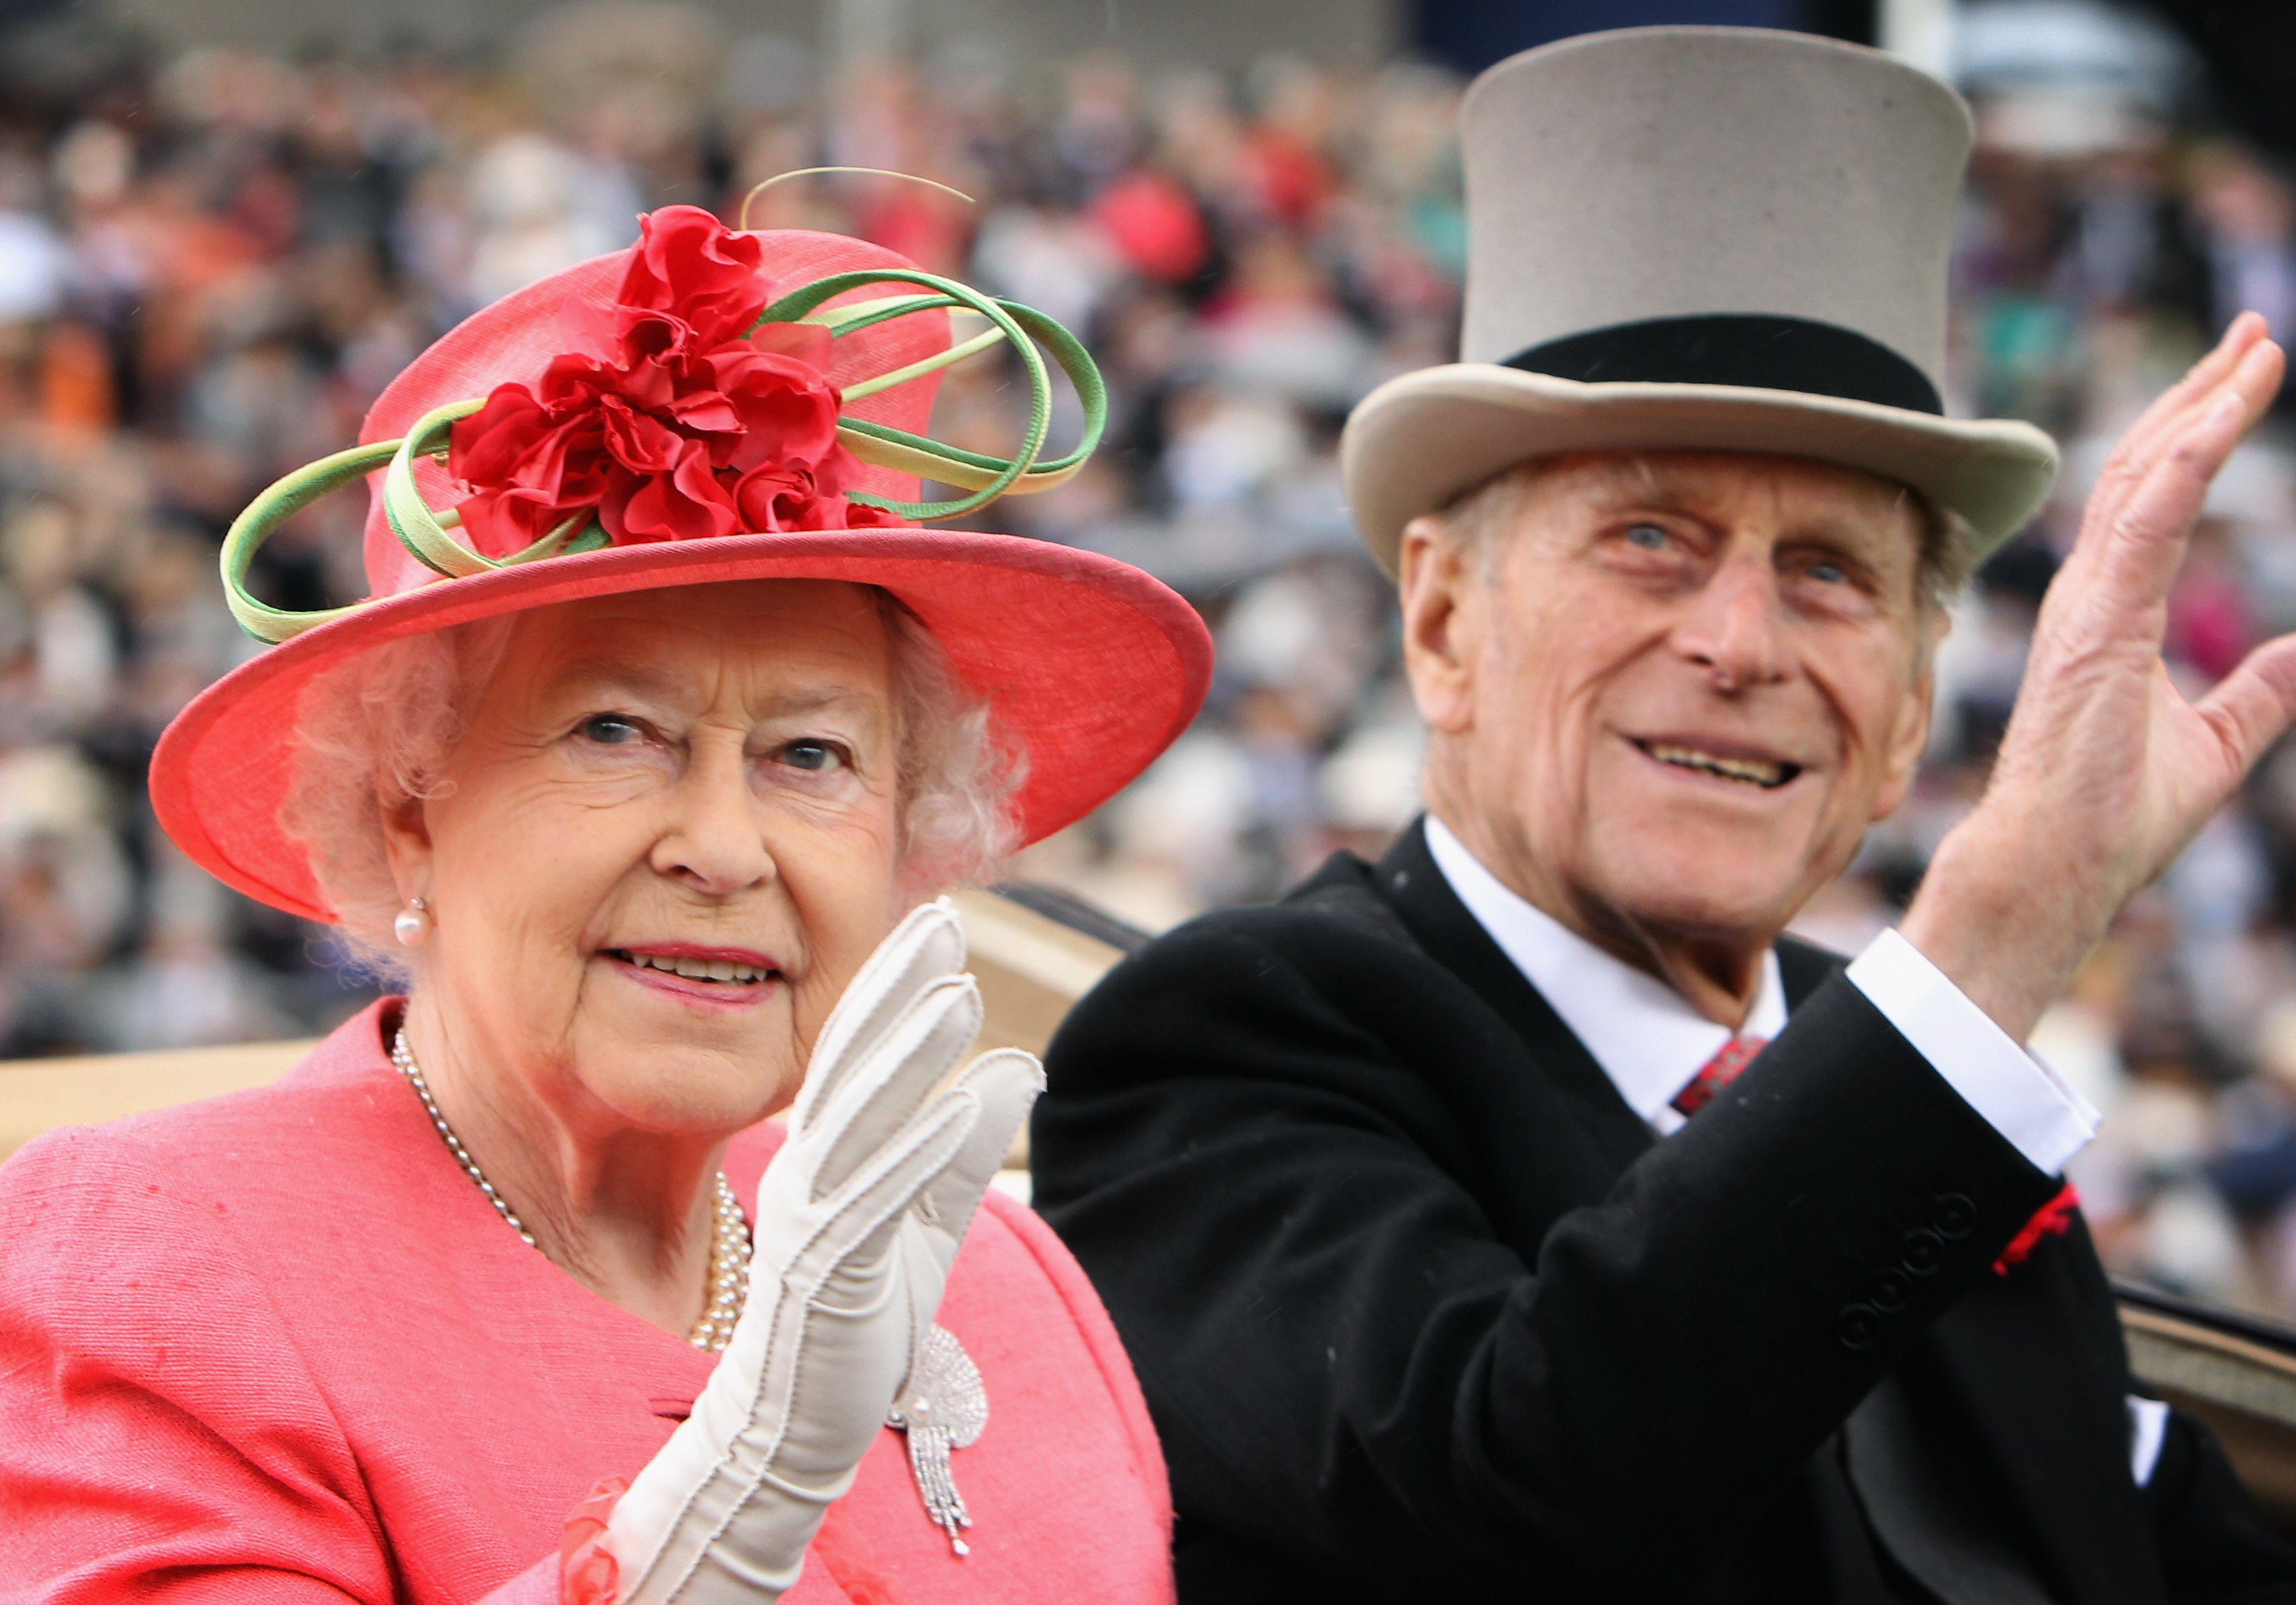 Queen Elizabeth ll and Prince Philip arrive in an open carriage on Ladies Day at Royal Ascot on June 16, 2011